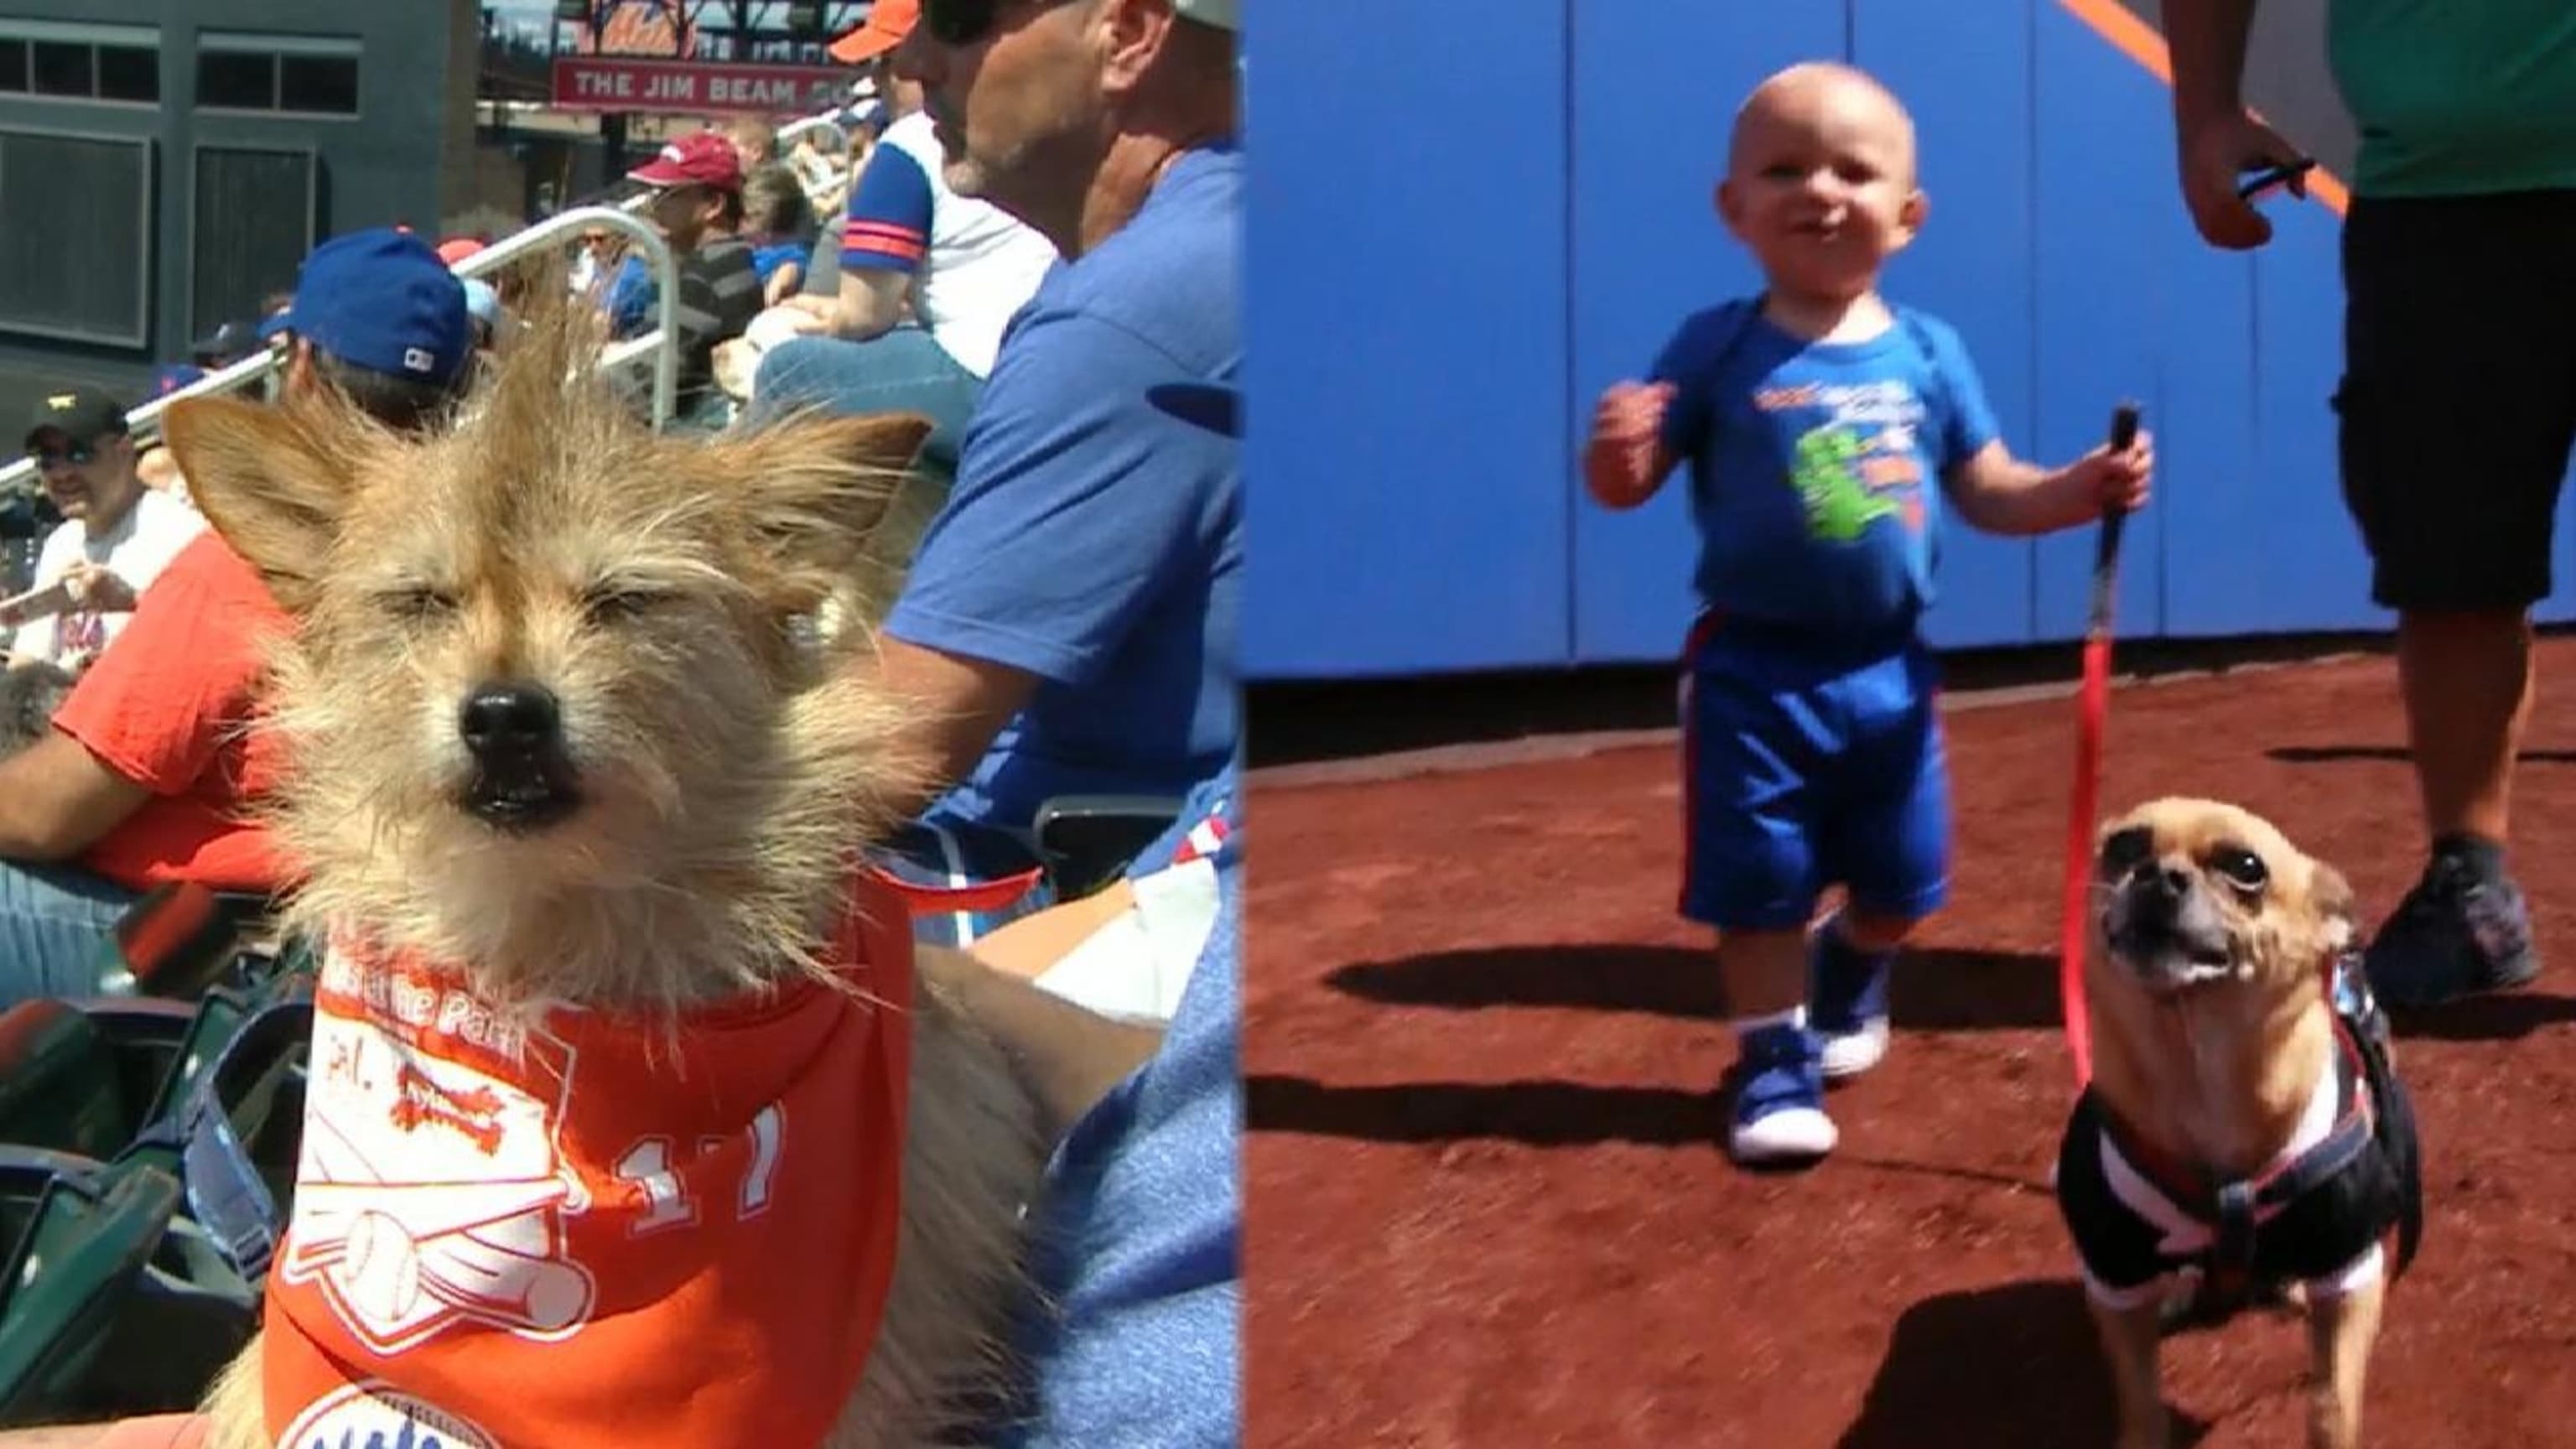 The Mets celebrated Labor Day by inviting fans to bring their dogs to the  park